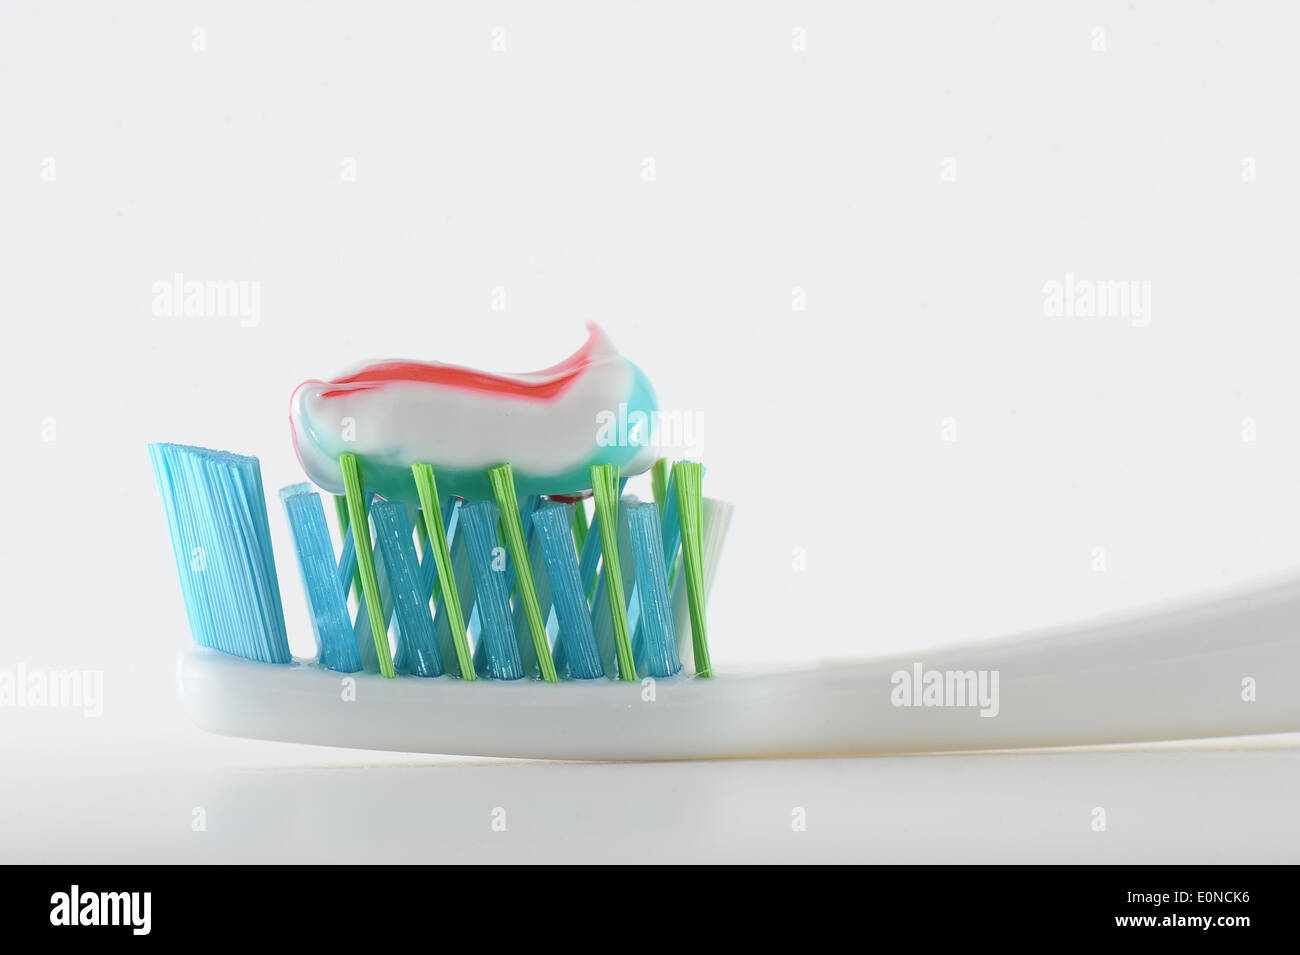 A toothbrush with toothpaste Stock Photo - Alamy